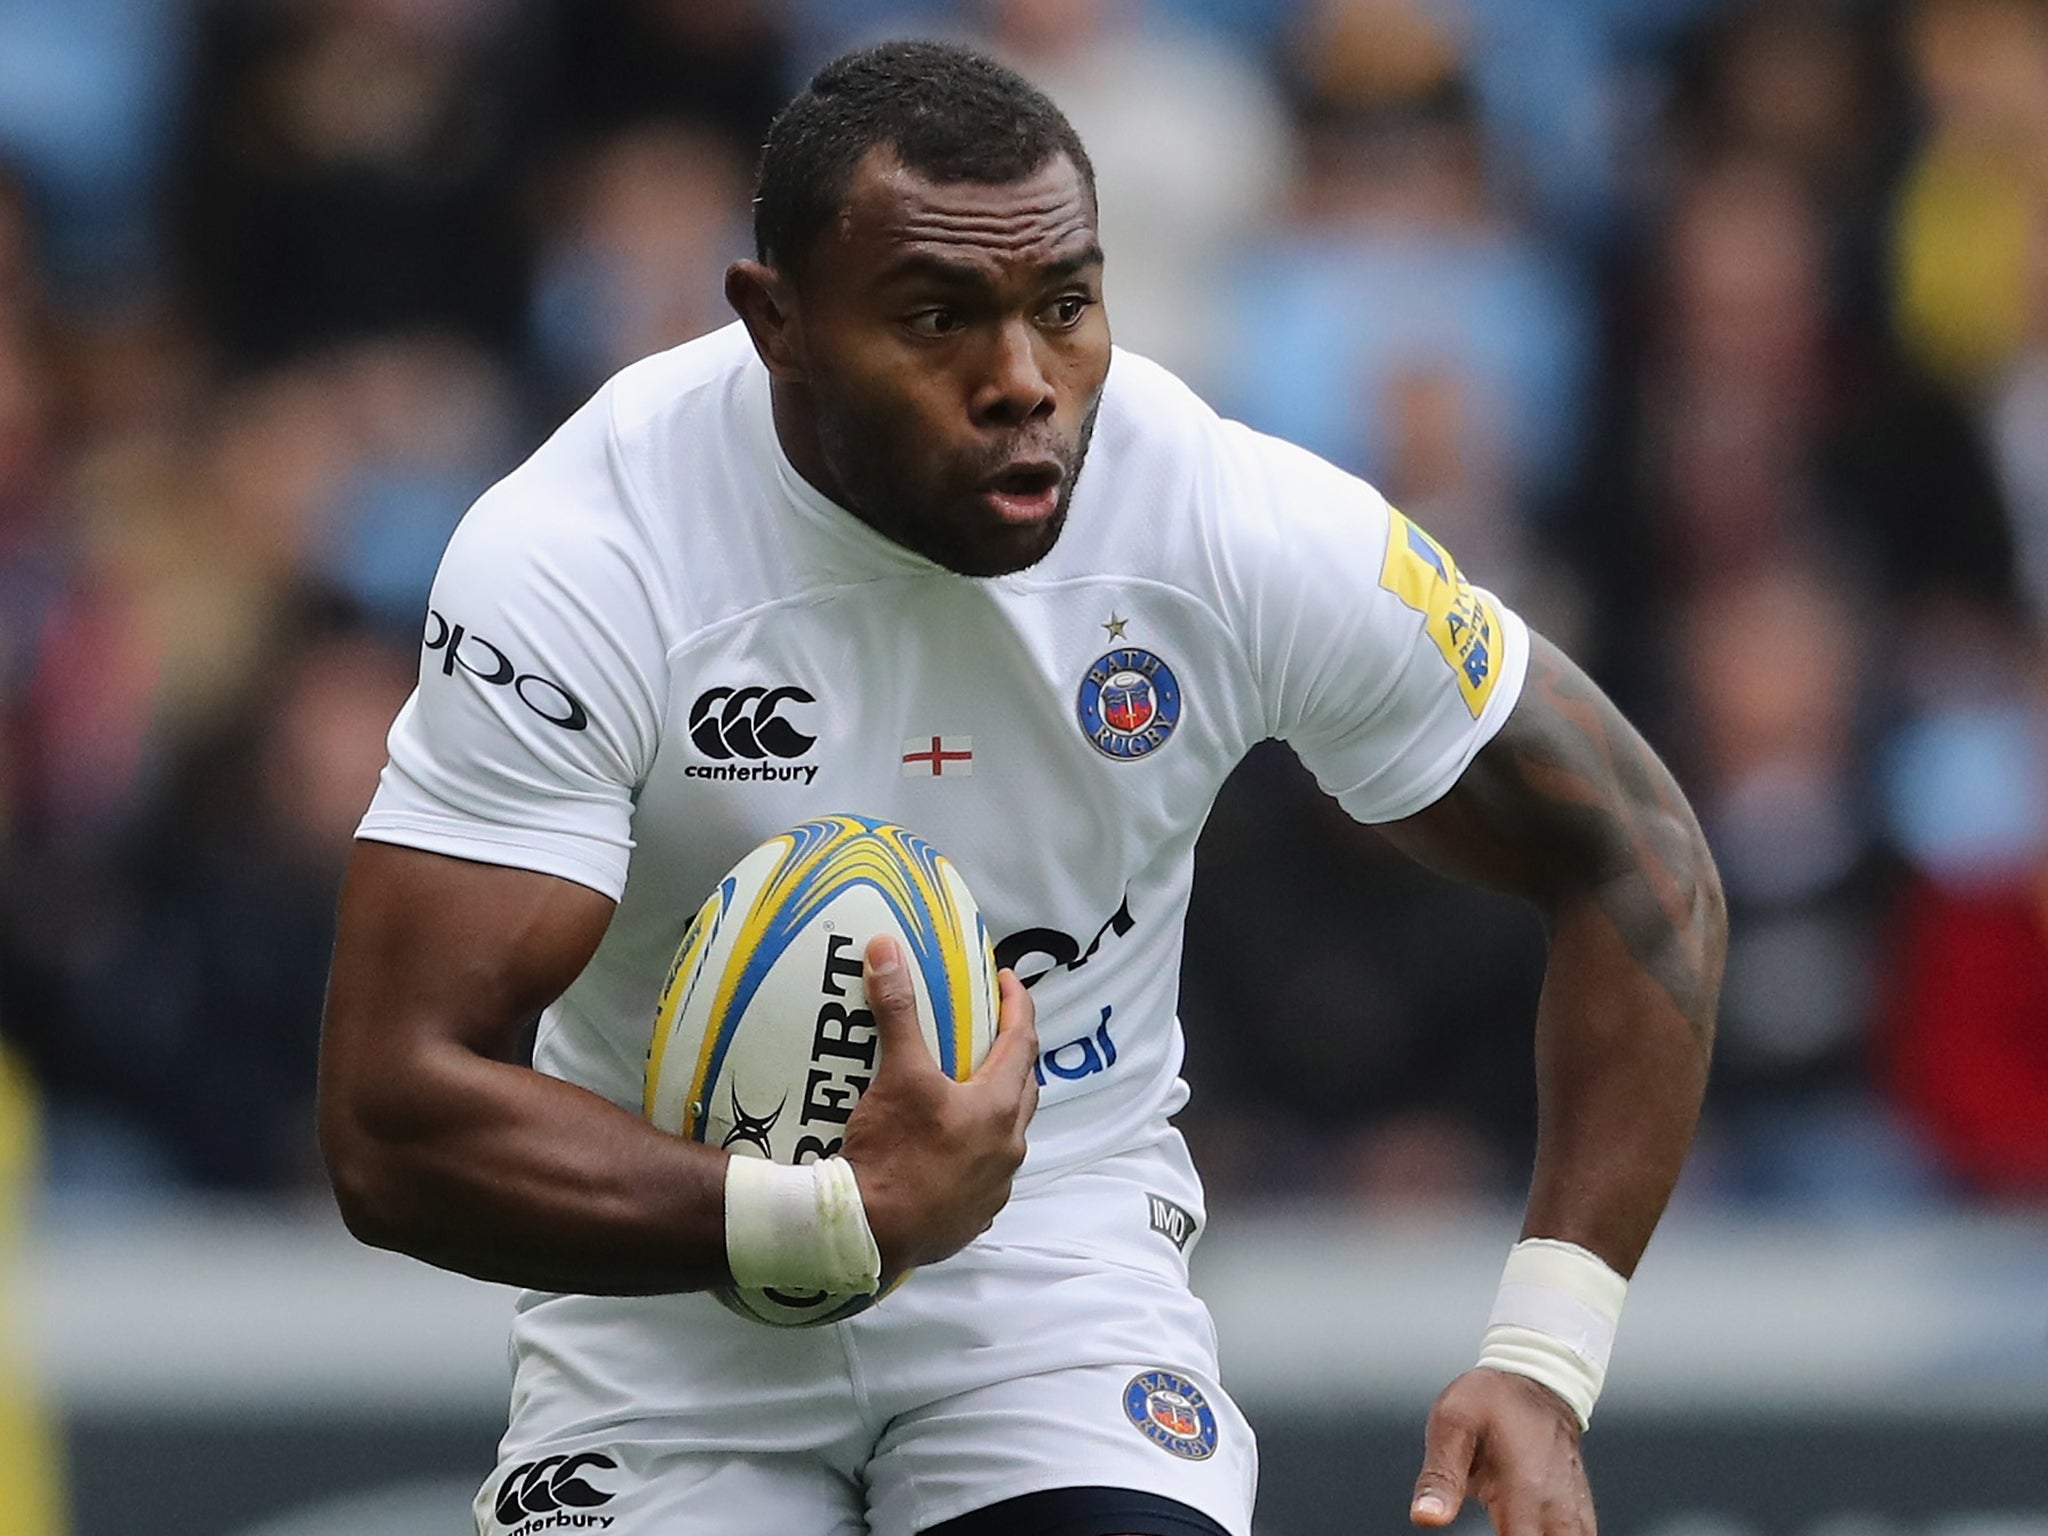 Semesa Rokoduguni has been called up to the England squad to replace Elliot Daly